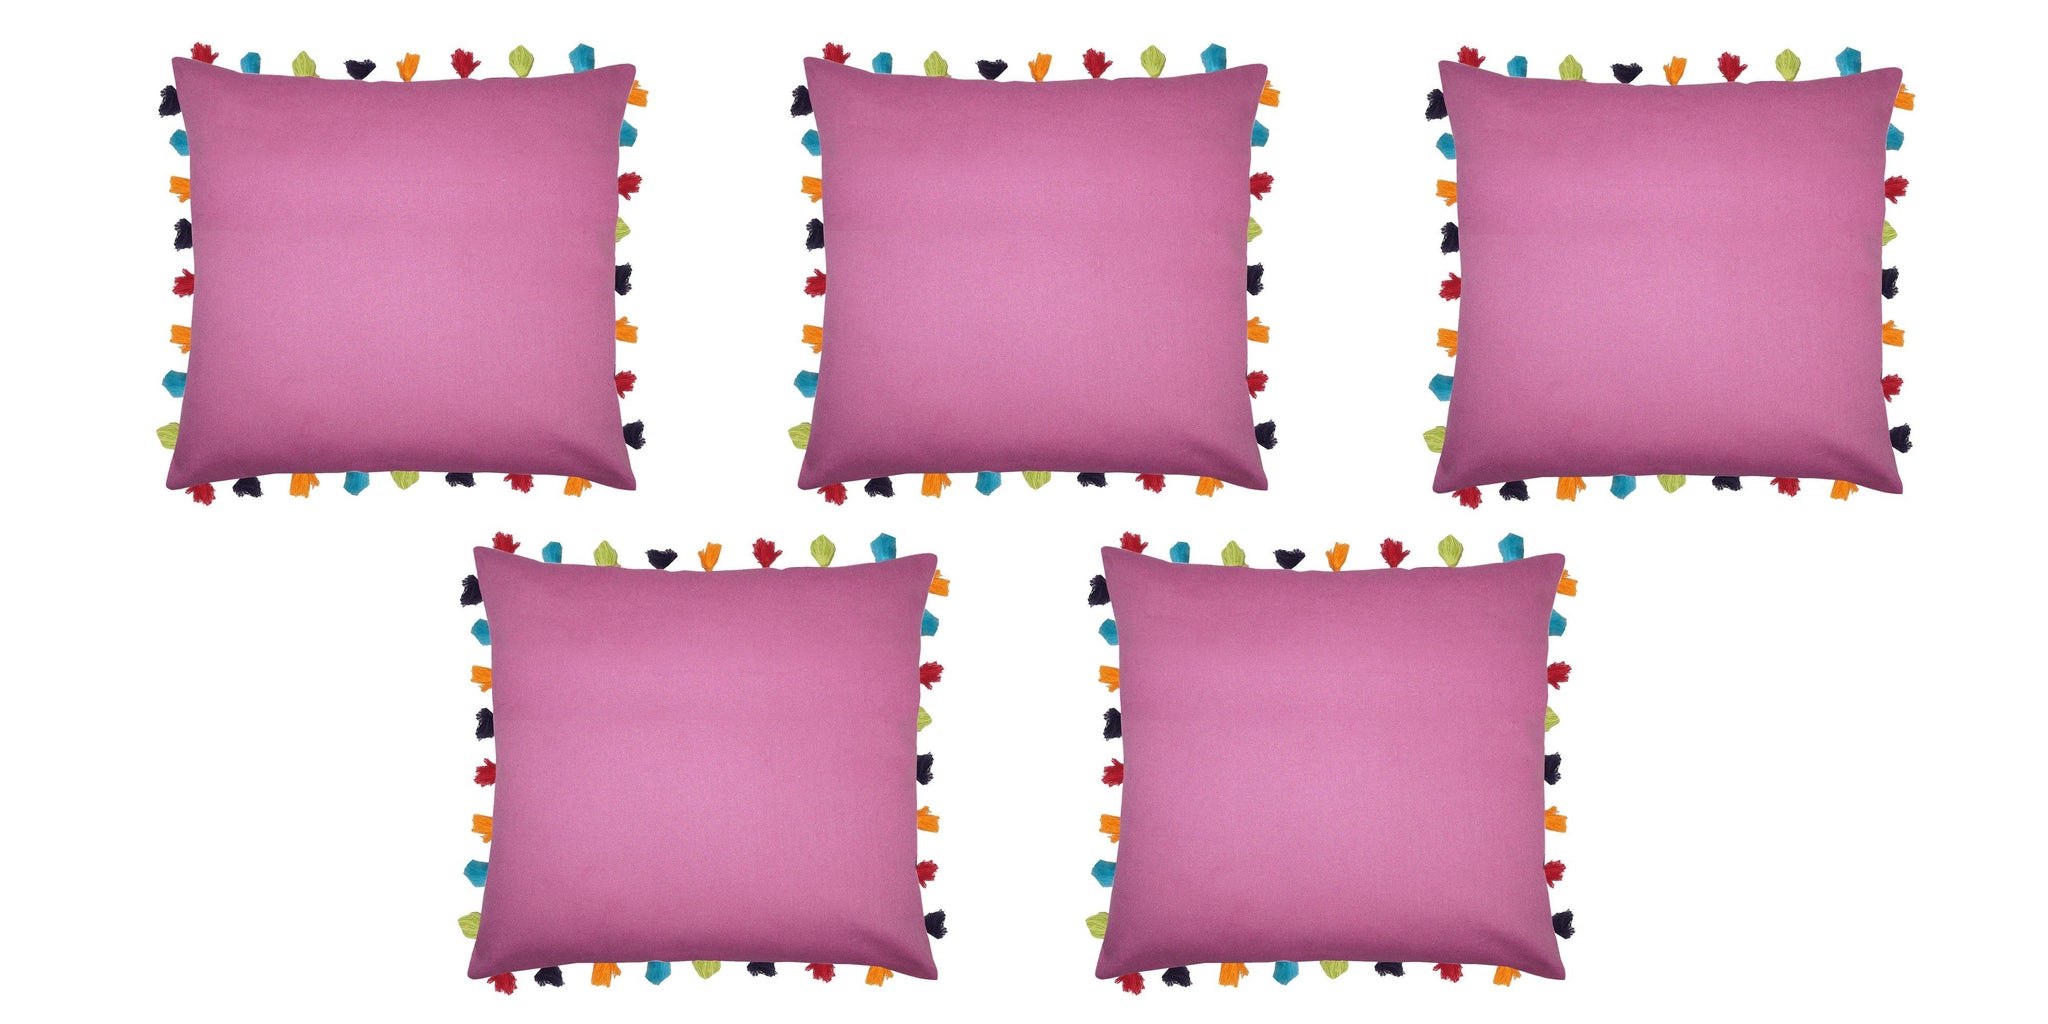 Lushomes Bordeaux Cushion Cover with Colorful tassels (5 pcs, 24 x 24”) - Lushomes